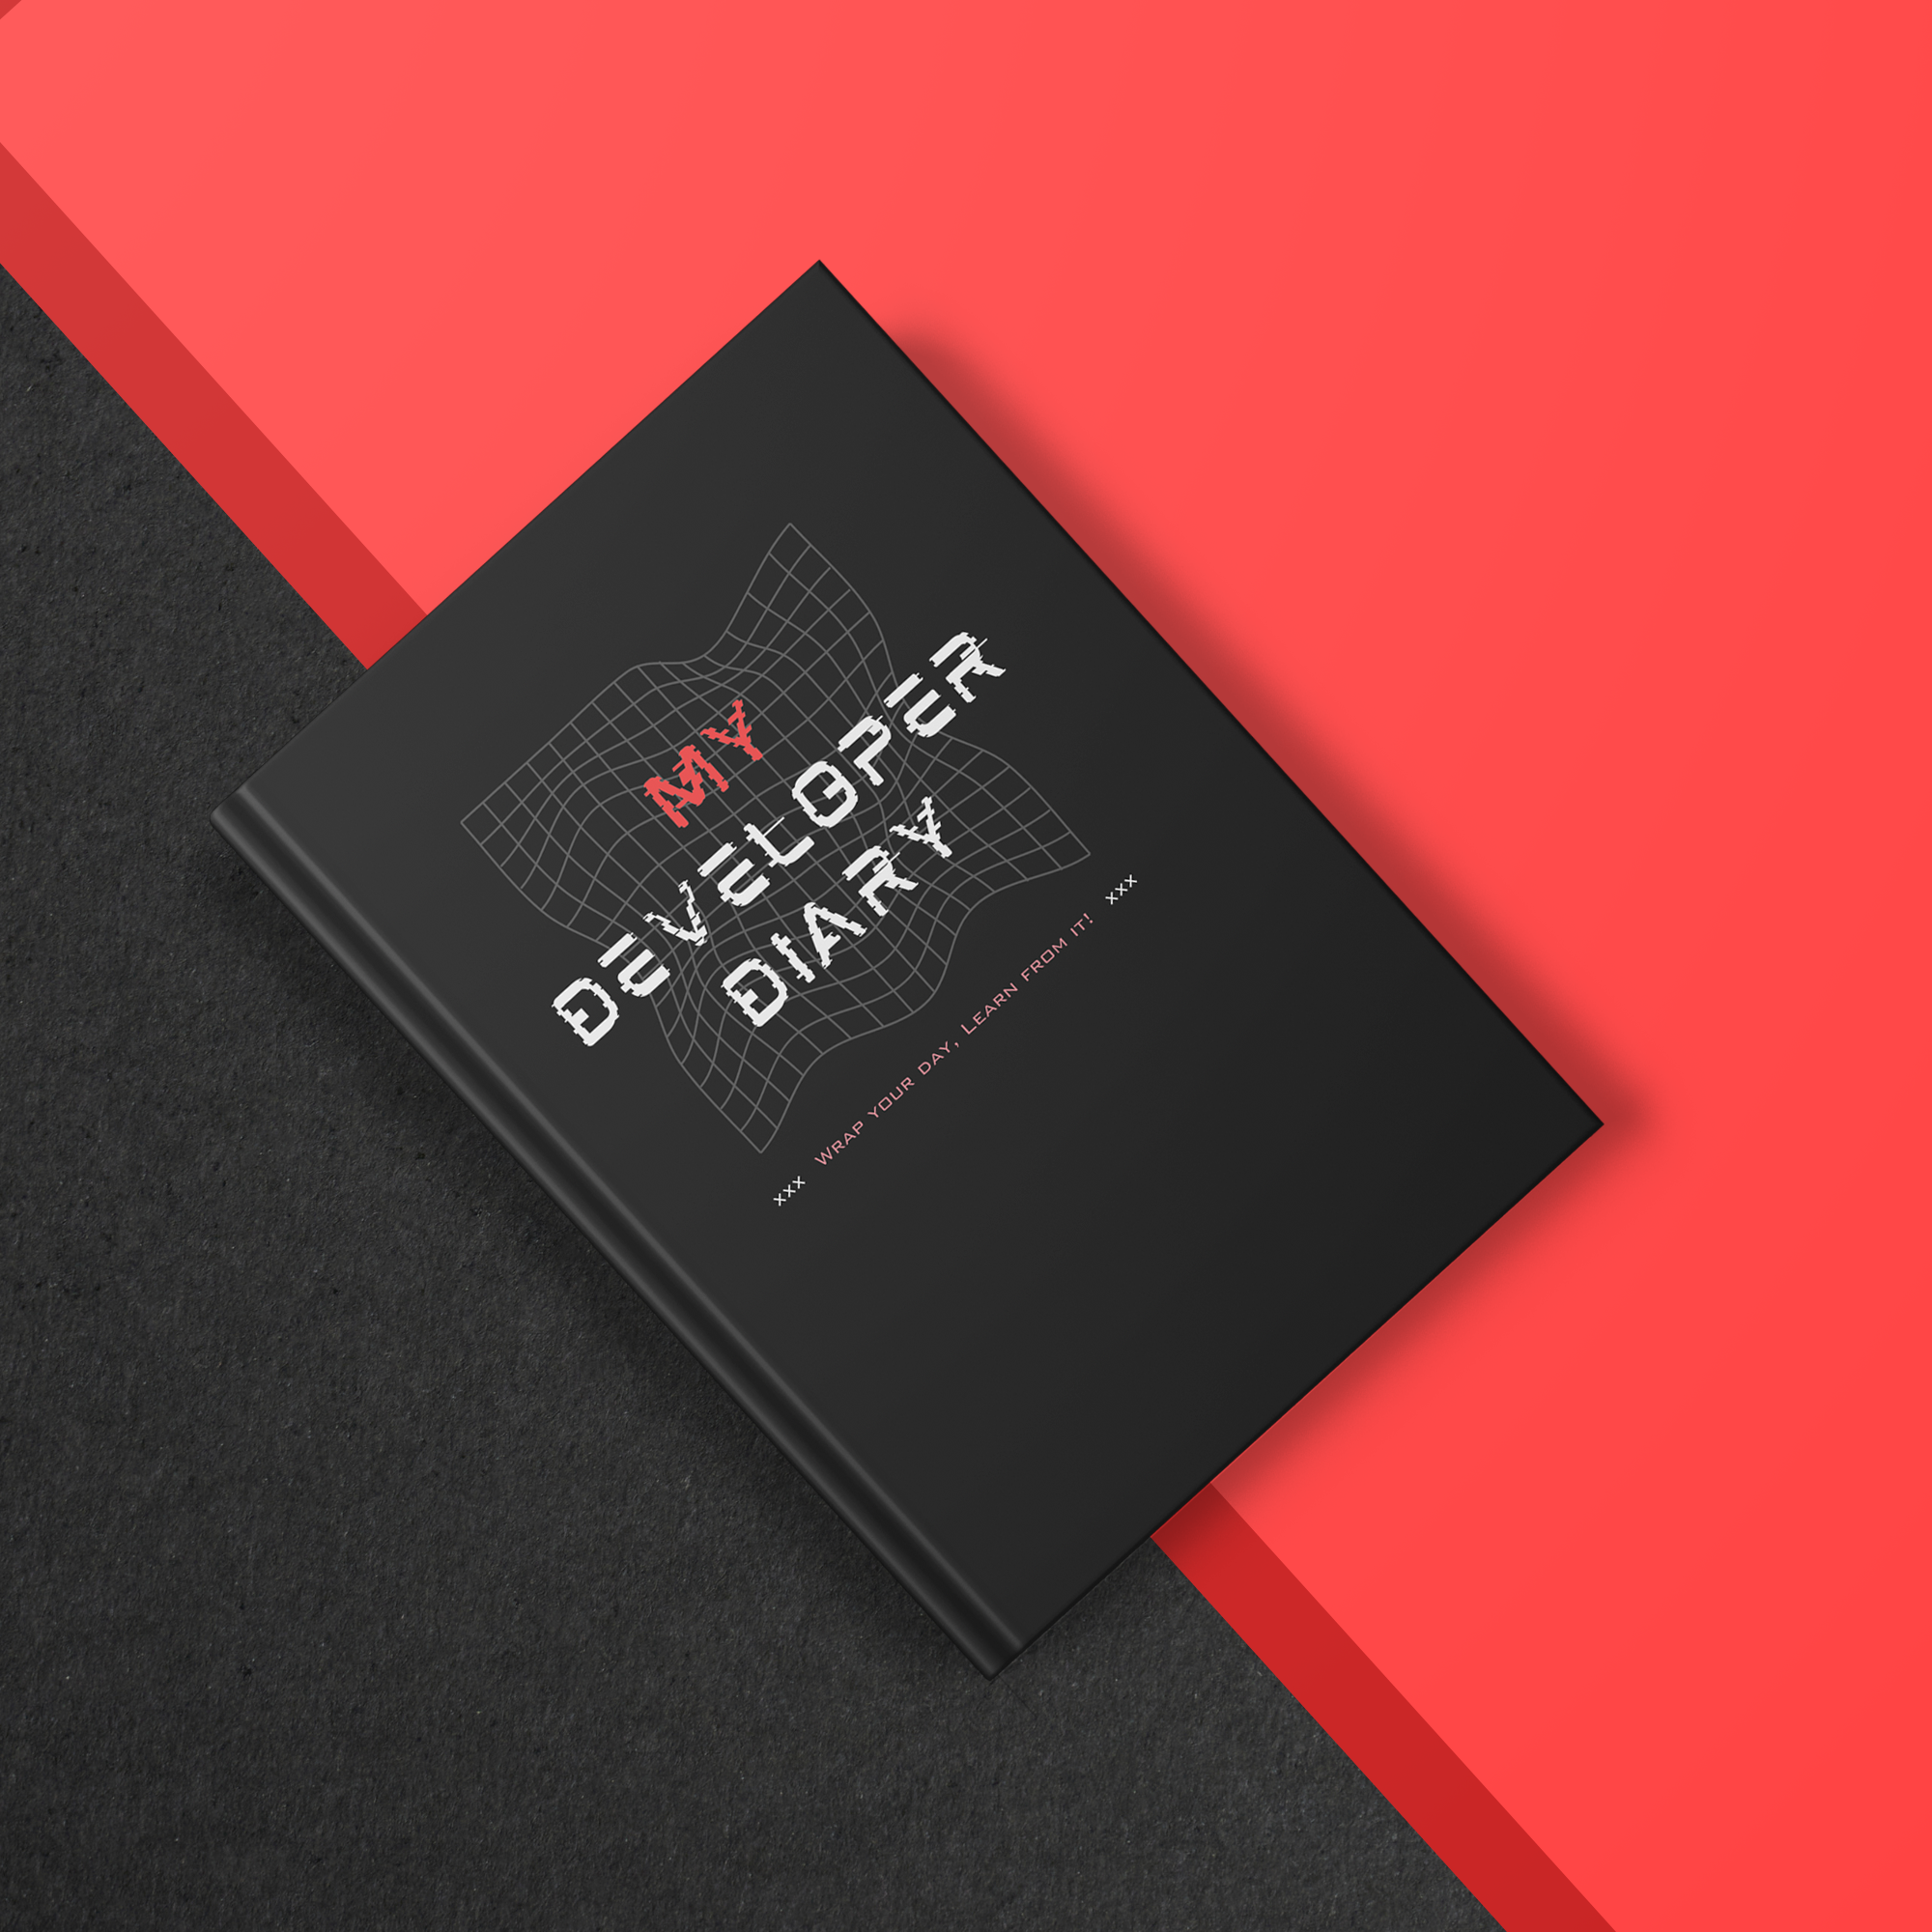 Developer Diary is now available as paper notebook